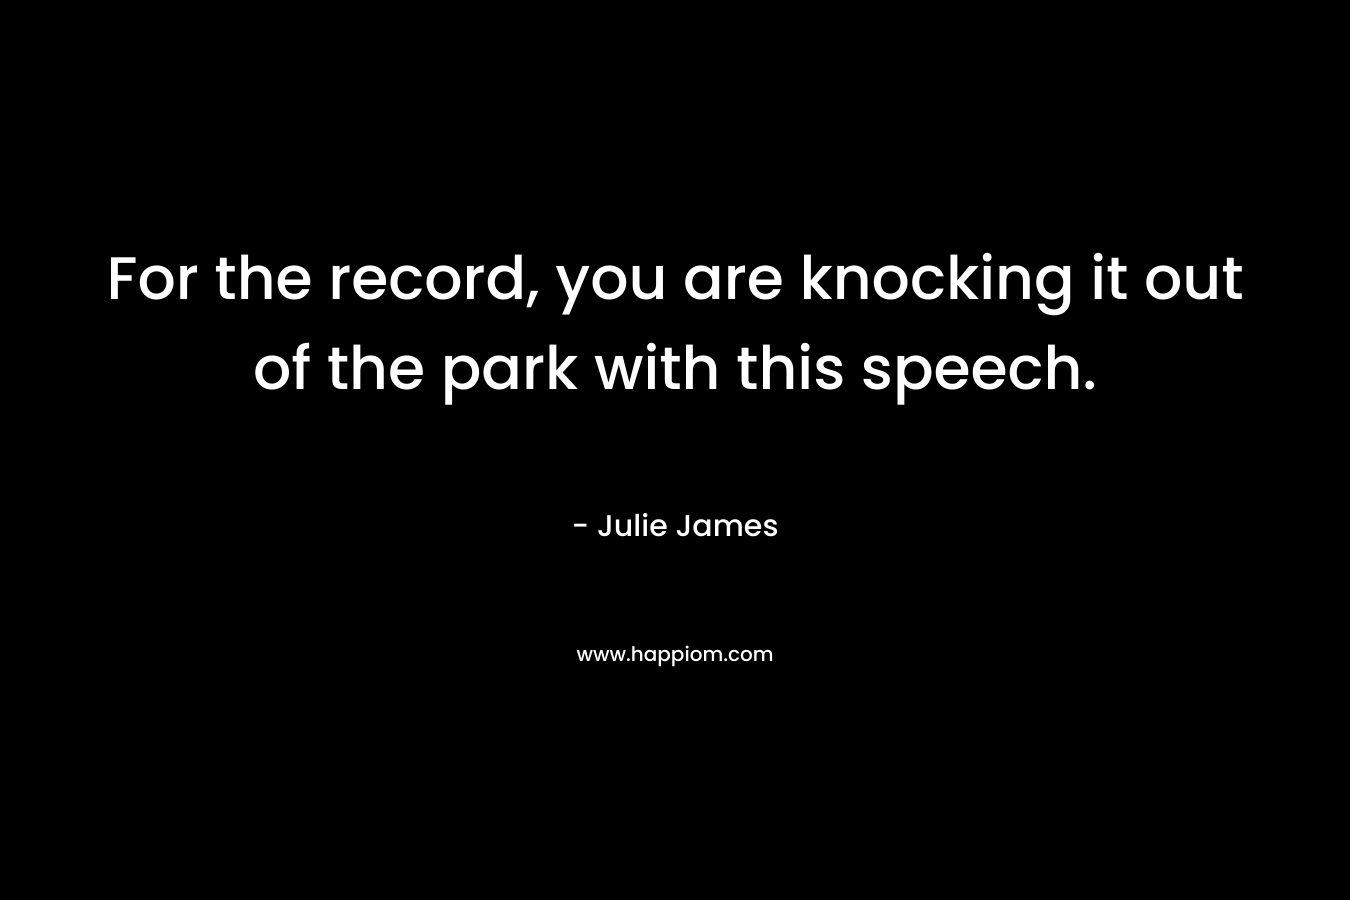 For the record, you are knocking it out of the park with this speech. – Julie James